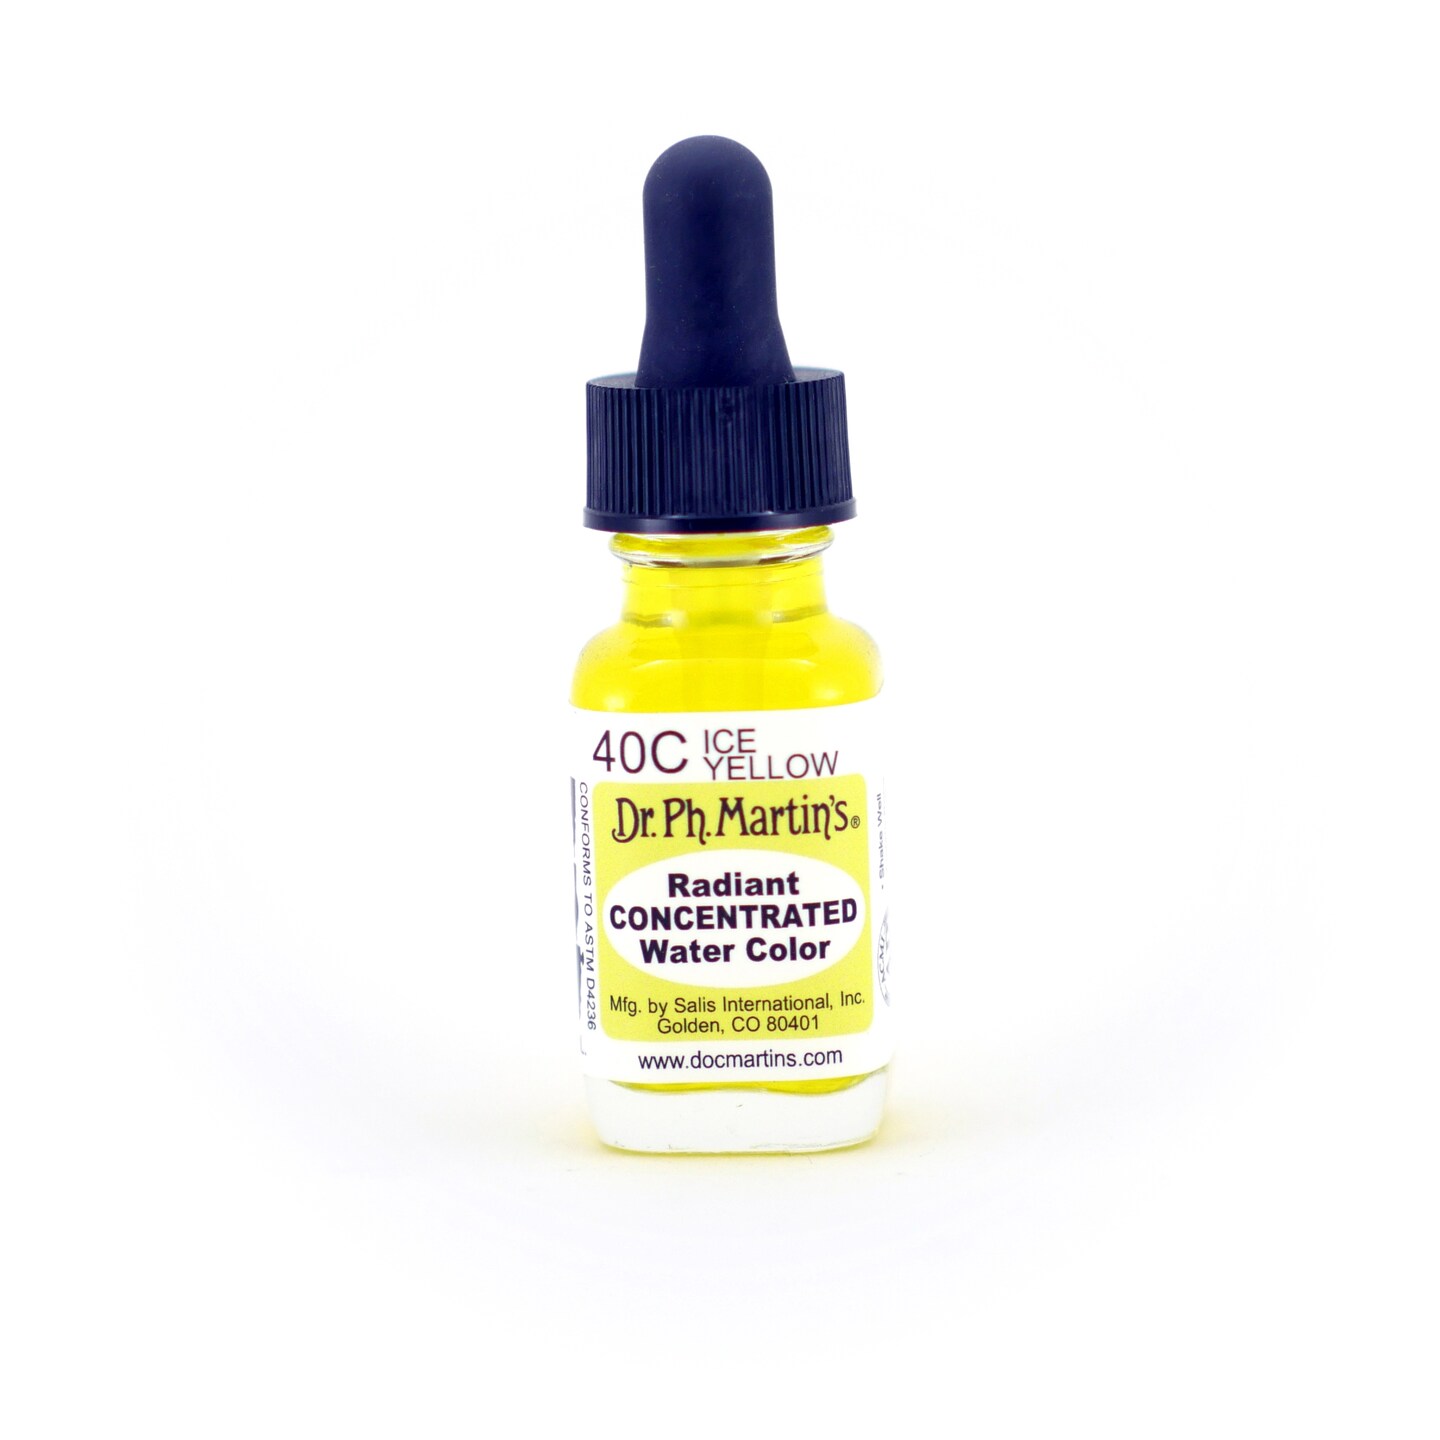 Dr. Ph. Martin's Radiant Concentrated Watercolor, .5 oz., Ice ...